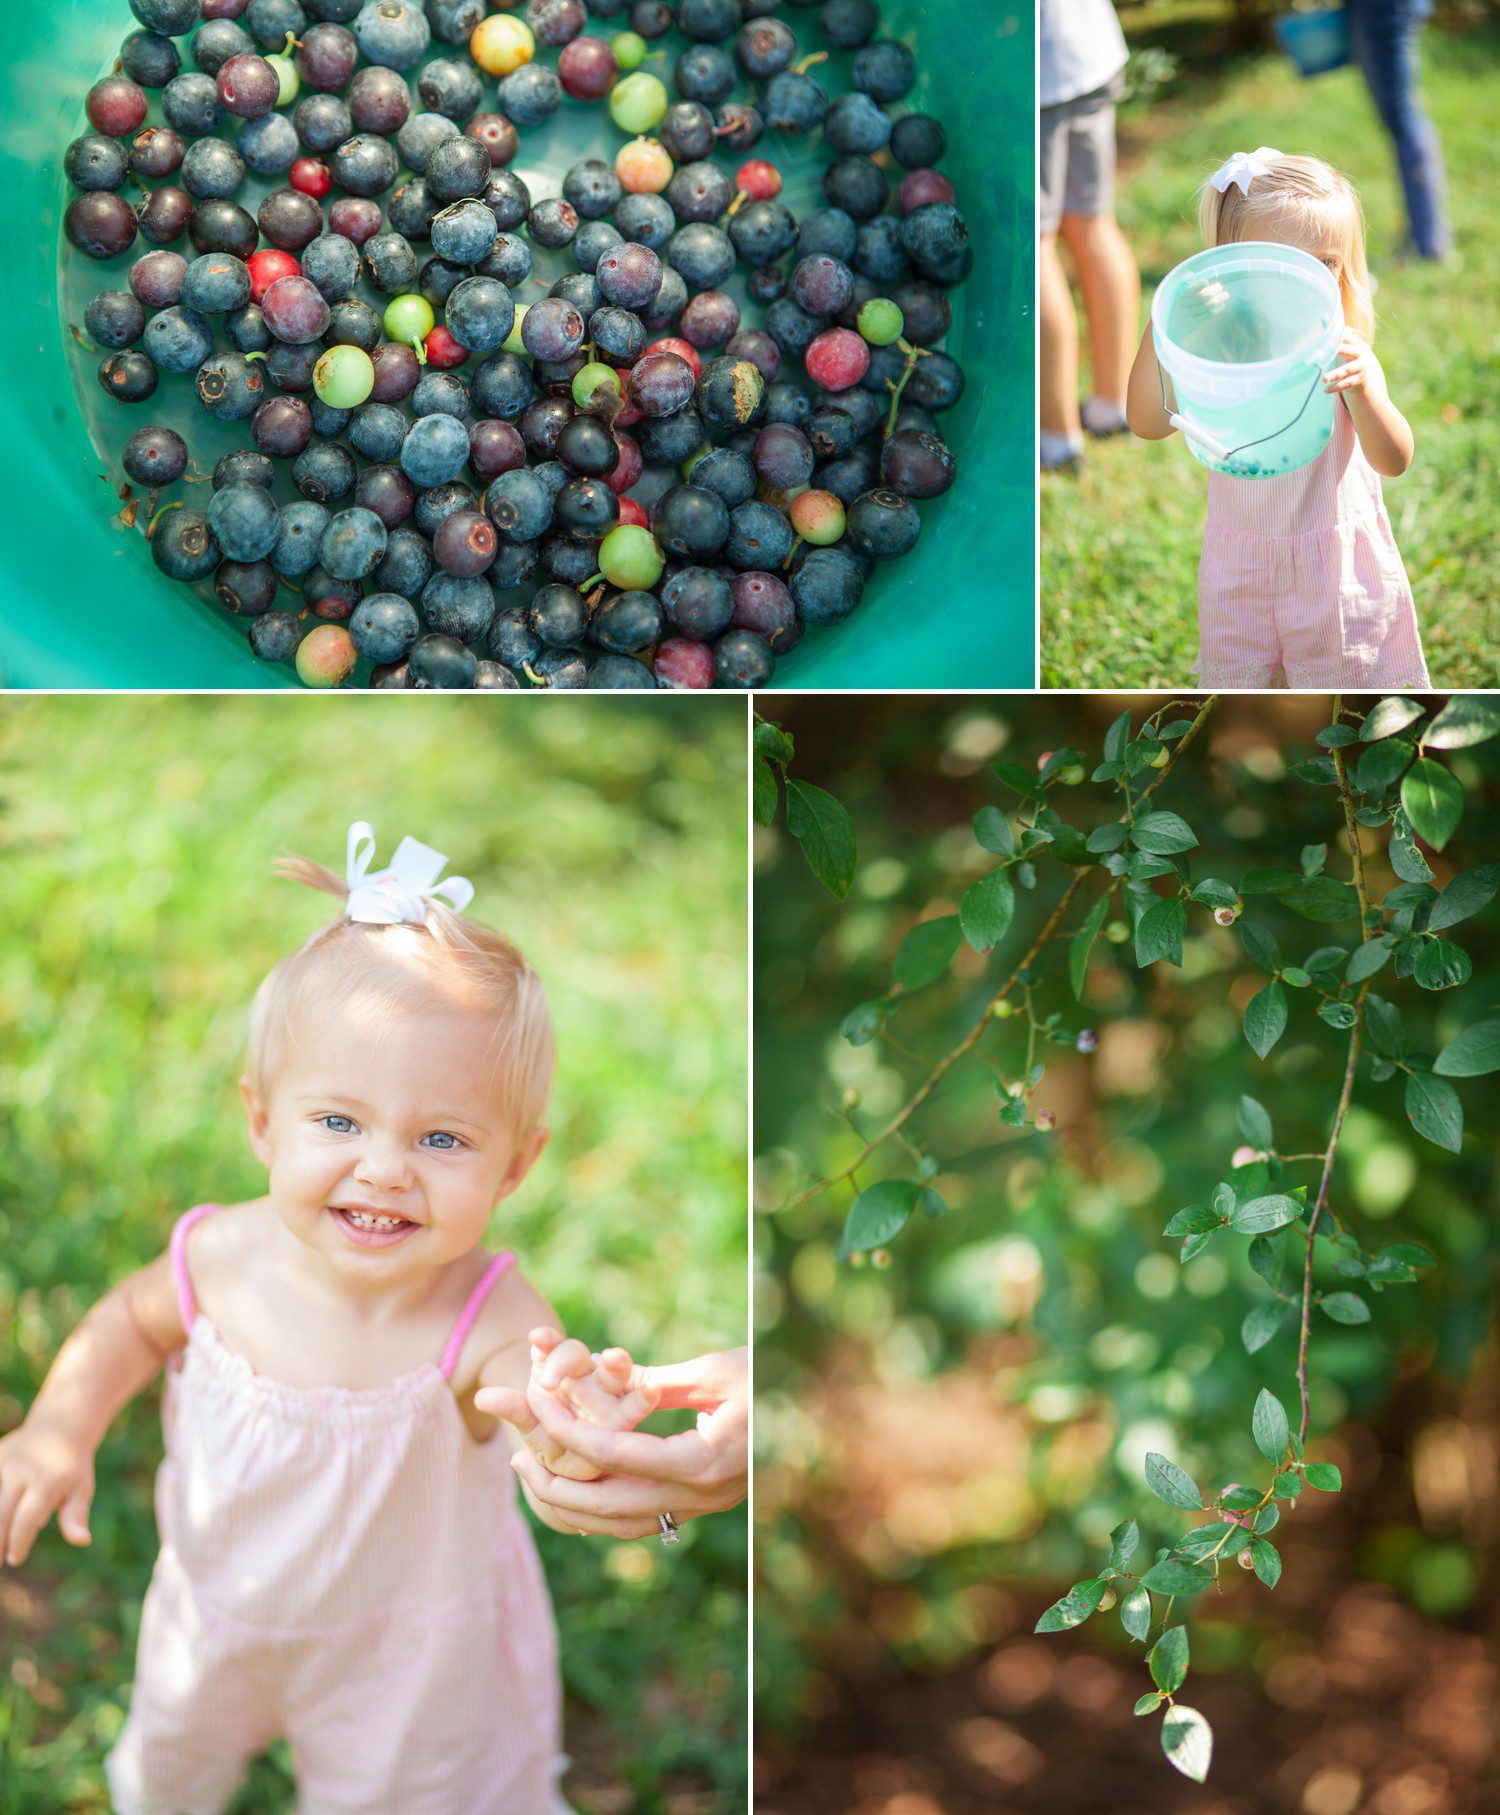 Blueberry patch family photo shoot at Golden Bell Farm in Franklin, TN photography by Krista Lee Nashville TN